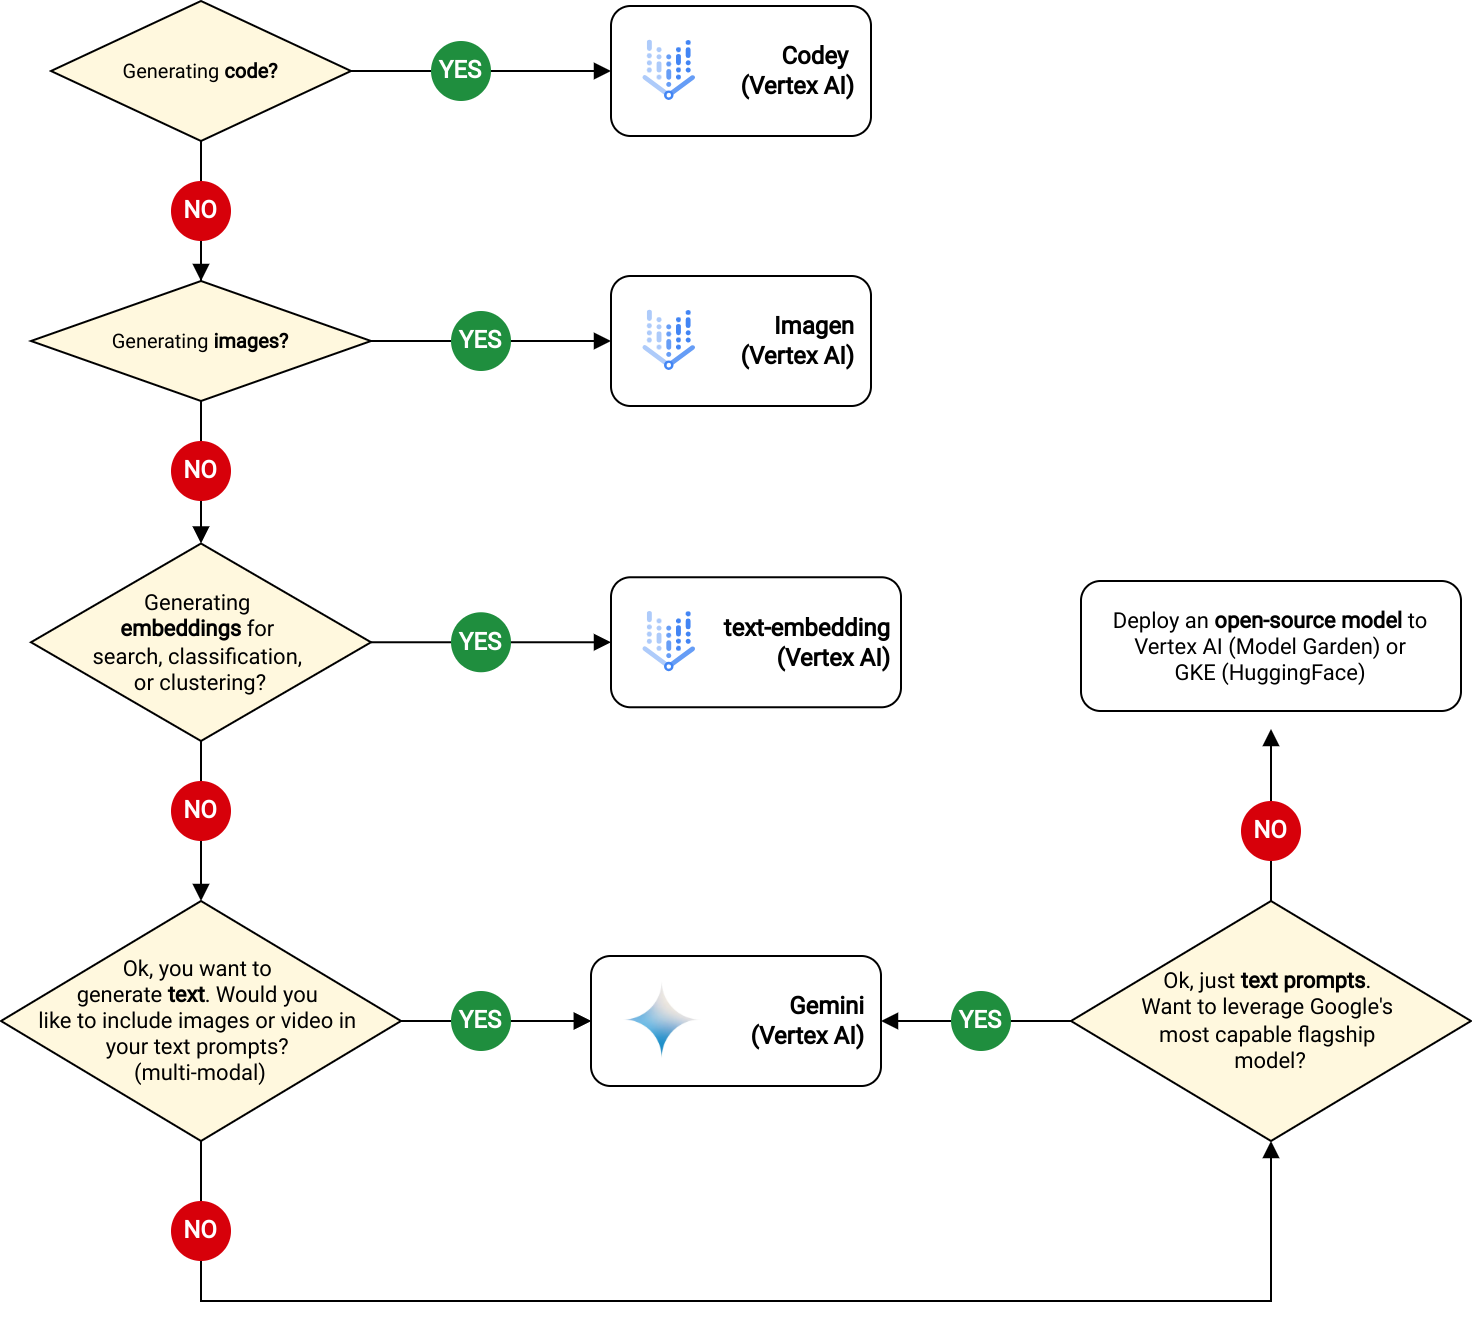 Decision tree guiding users to choose a Vertex AI service, to generate text or code, with options for using text embeddings, images, or video.